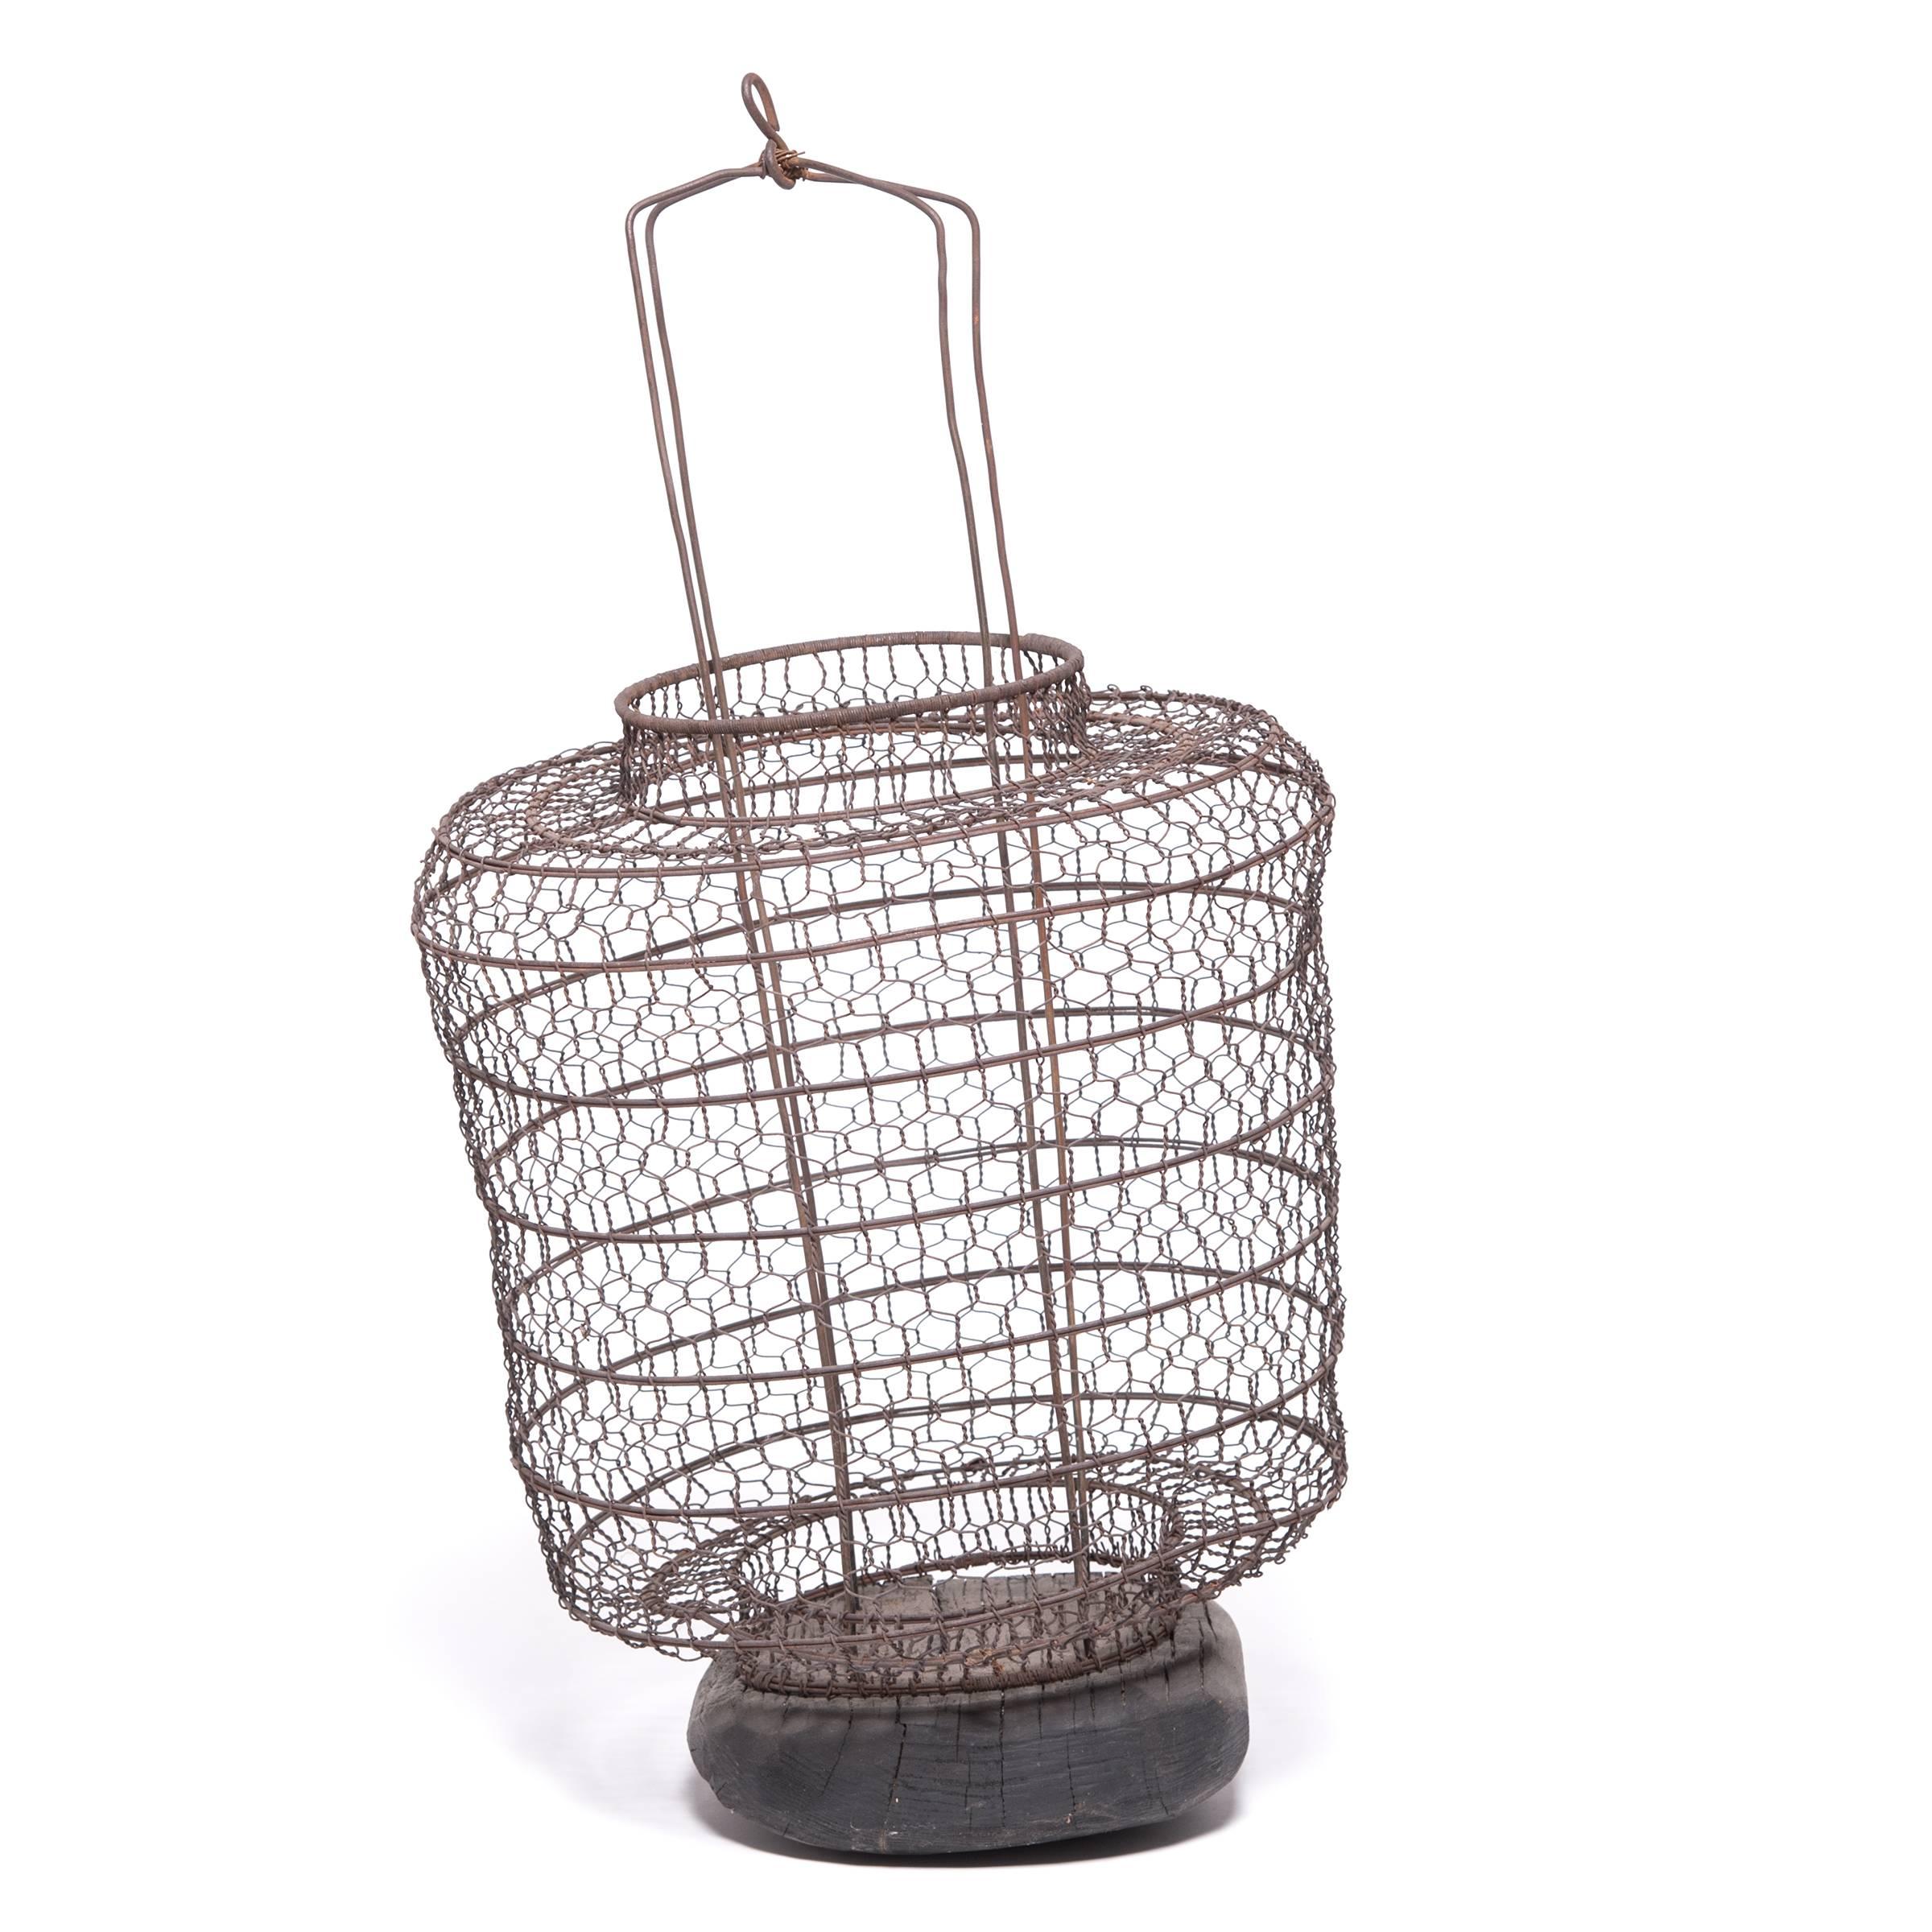 This 19th century lantern once hung from a small boat, illuminating the waters for nighttime fishing. Handwoven from iron wire, the lantern has a lacy, open pattern and may have been lined with fabric or paper to provide protection from wind.